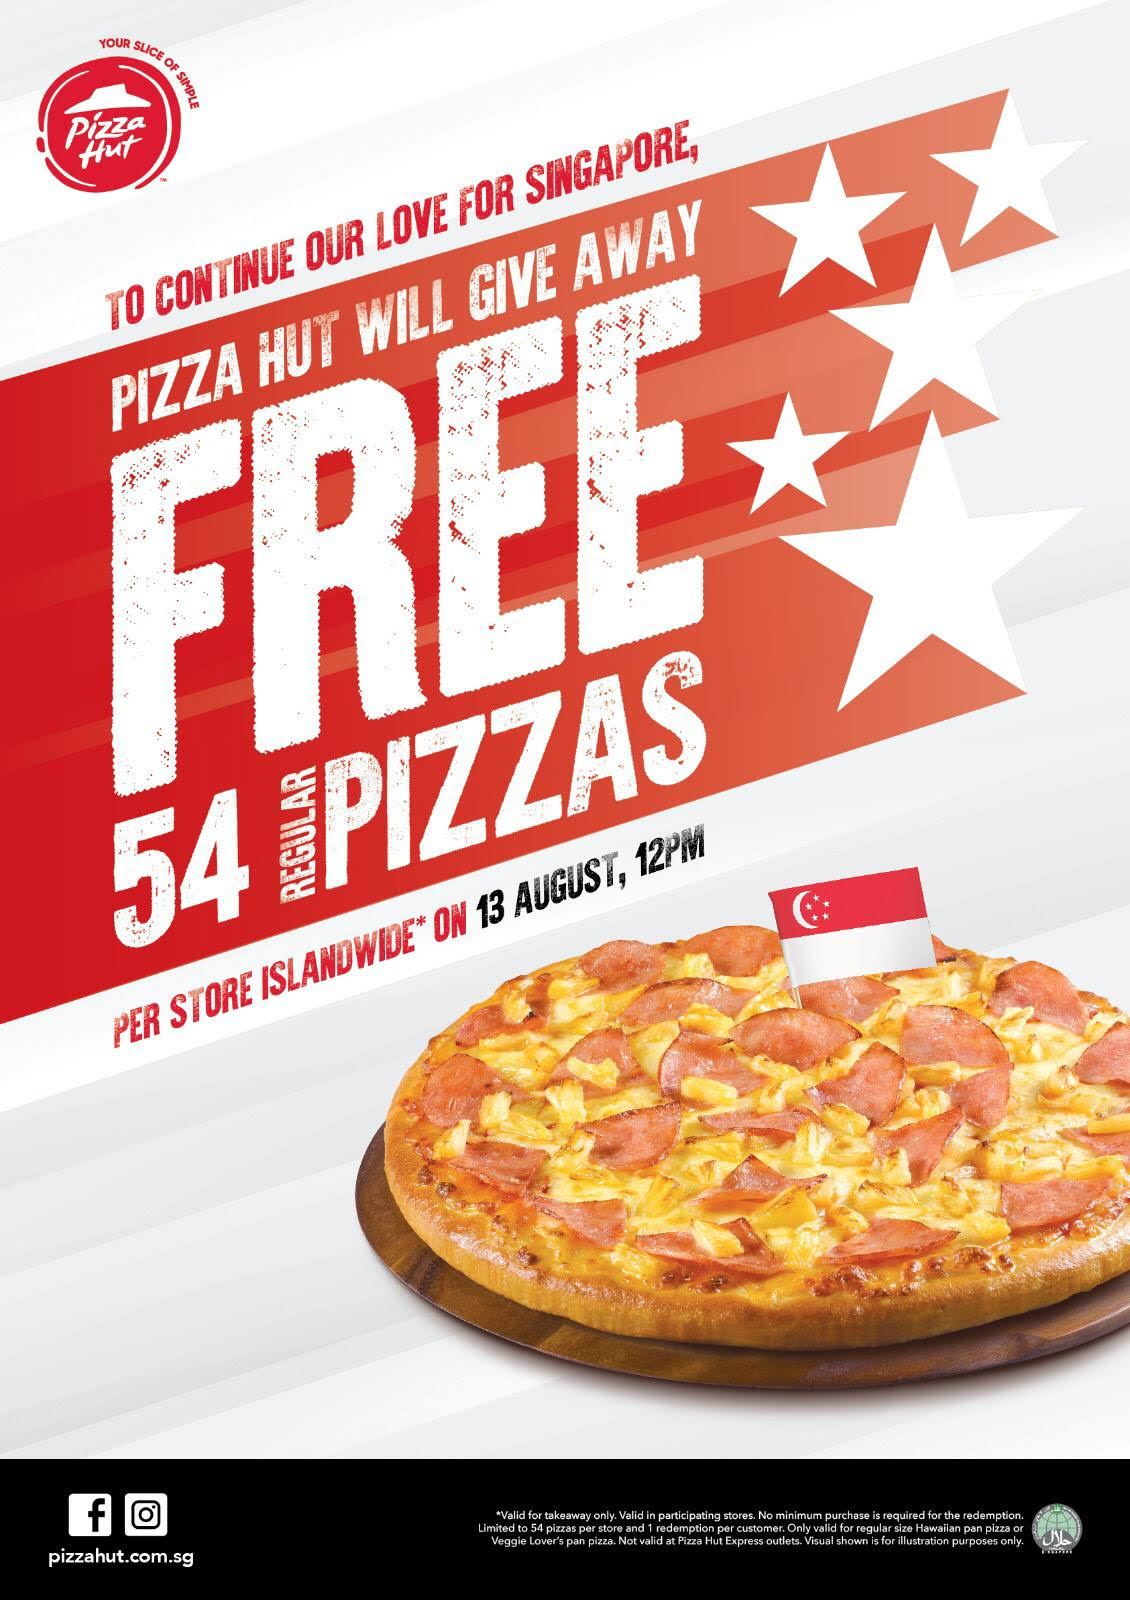 Pizza Hut giving away 3,186 free pizzas to celebrate National Day